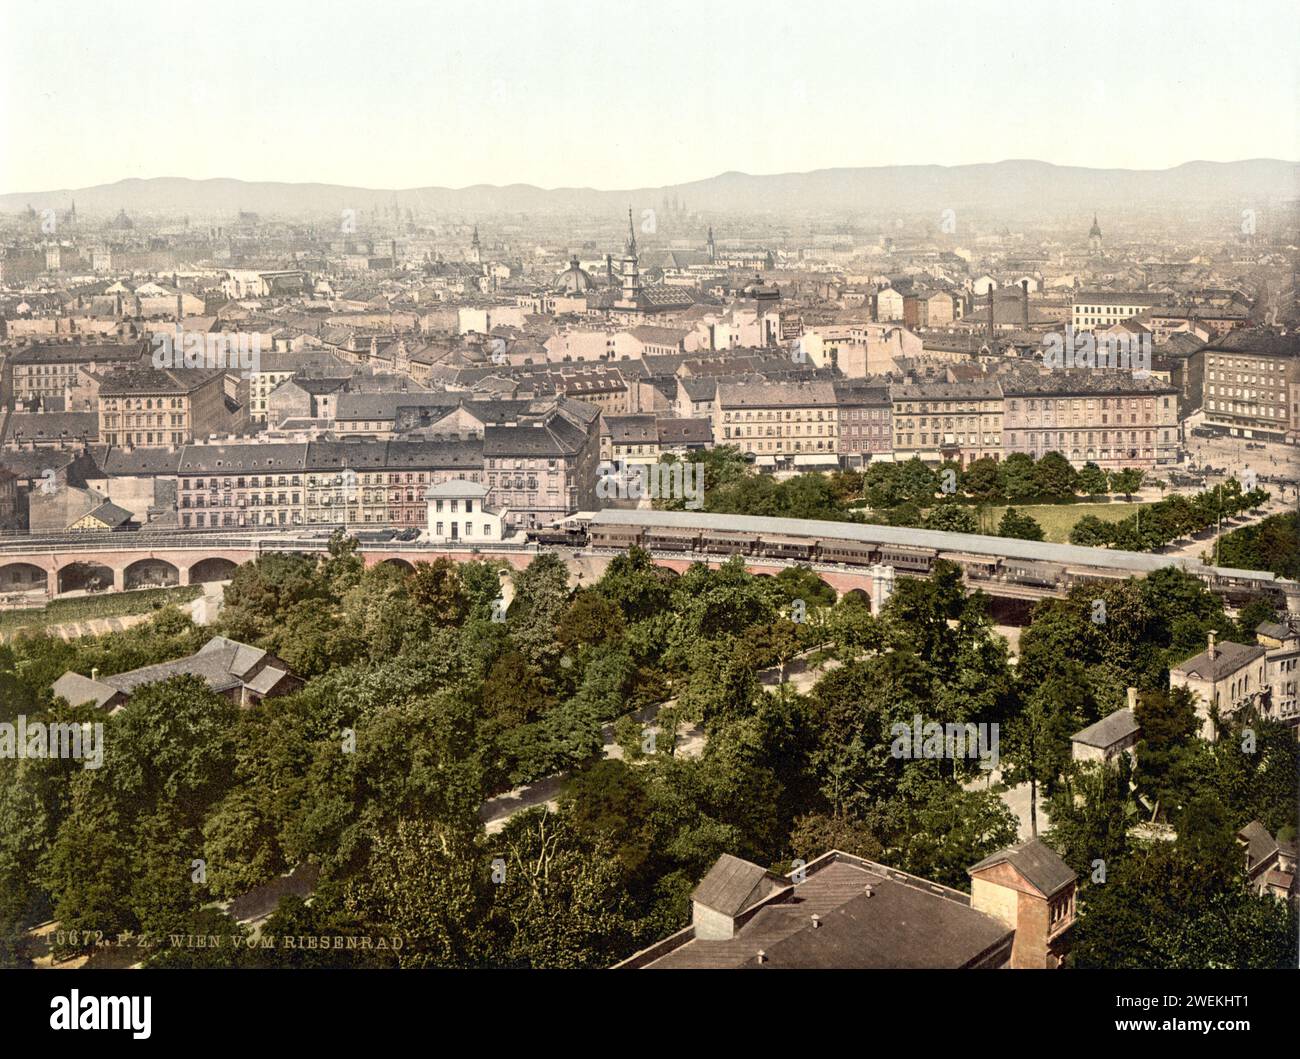 Overview of the city of Vienna, Austria, ca. 1890-1900 Stock Photo